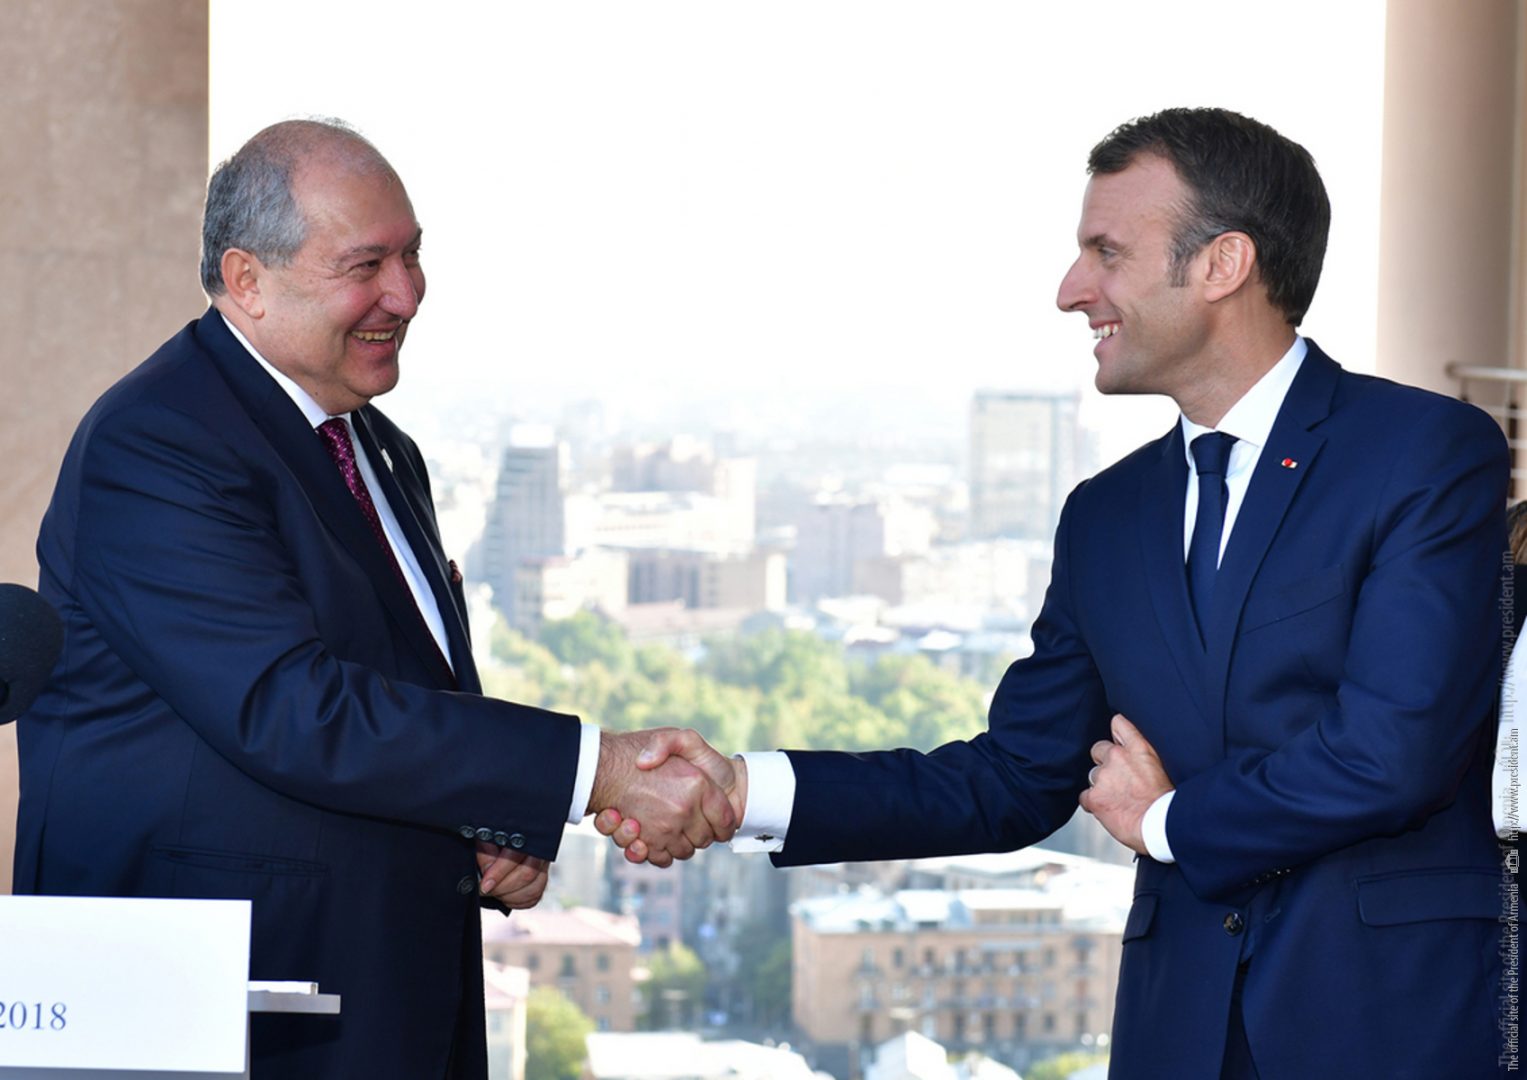 Macron: France and Armenia can be proud of relations anchored on shared memory and vision